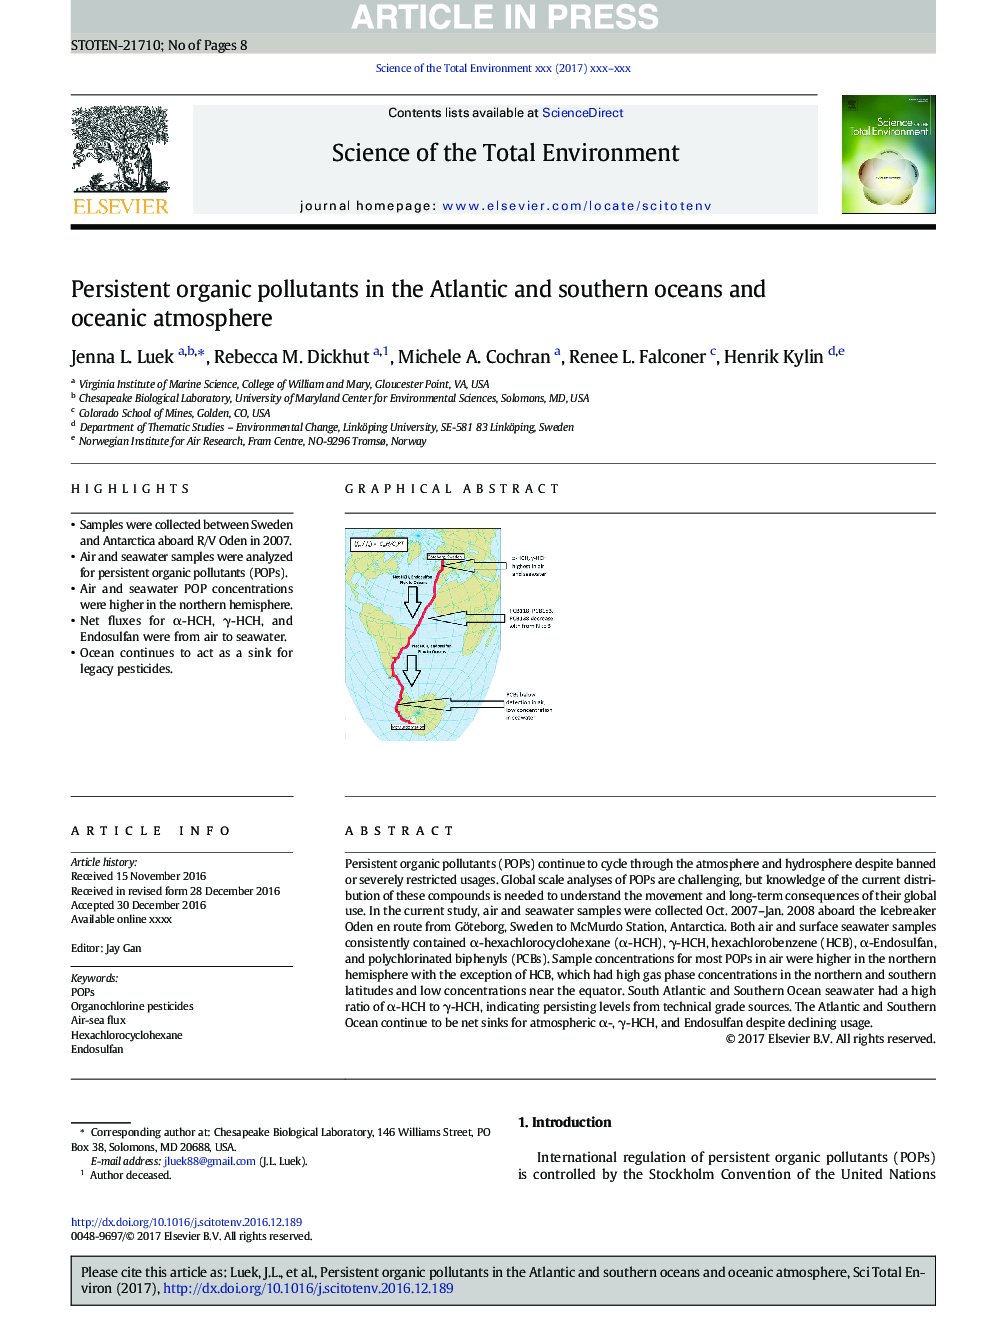 Persistent organic pollutants in the Atlantic and southern oceans and oceanic atmosphere